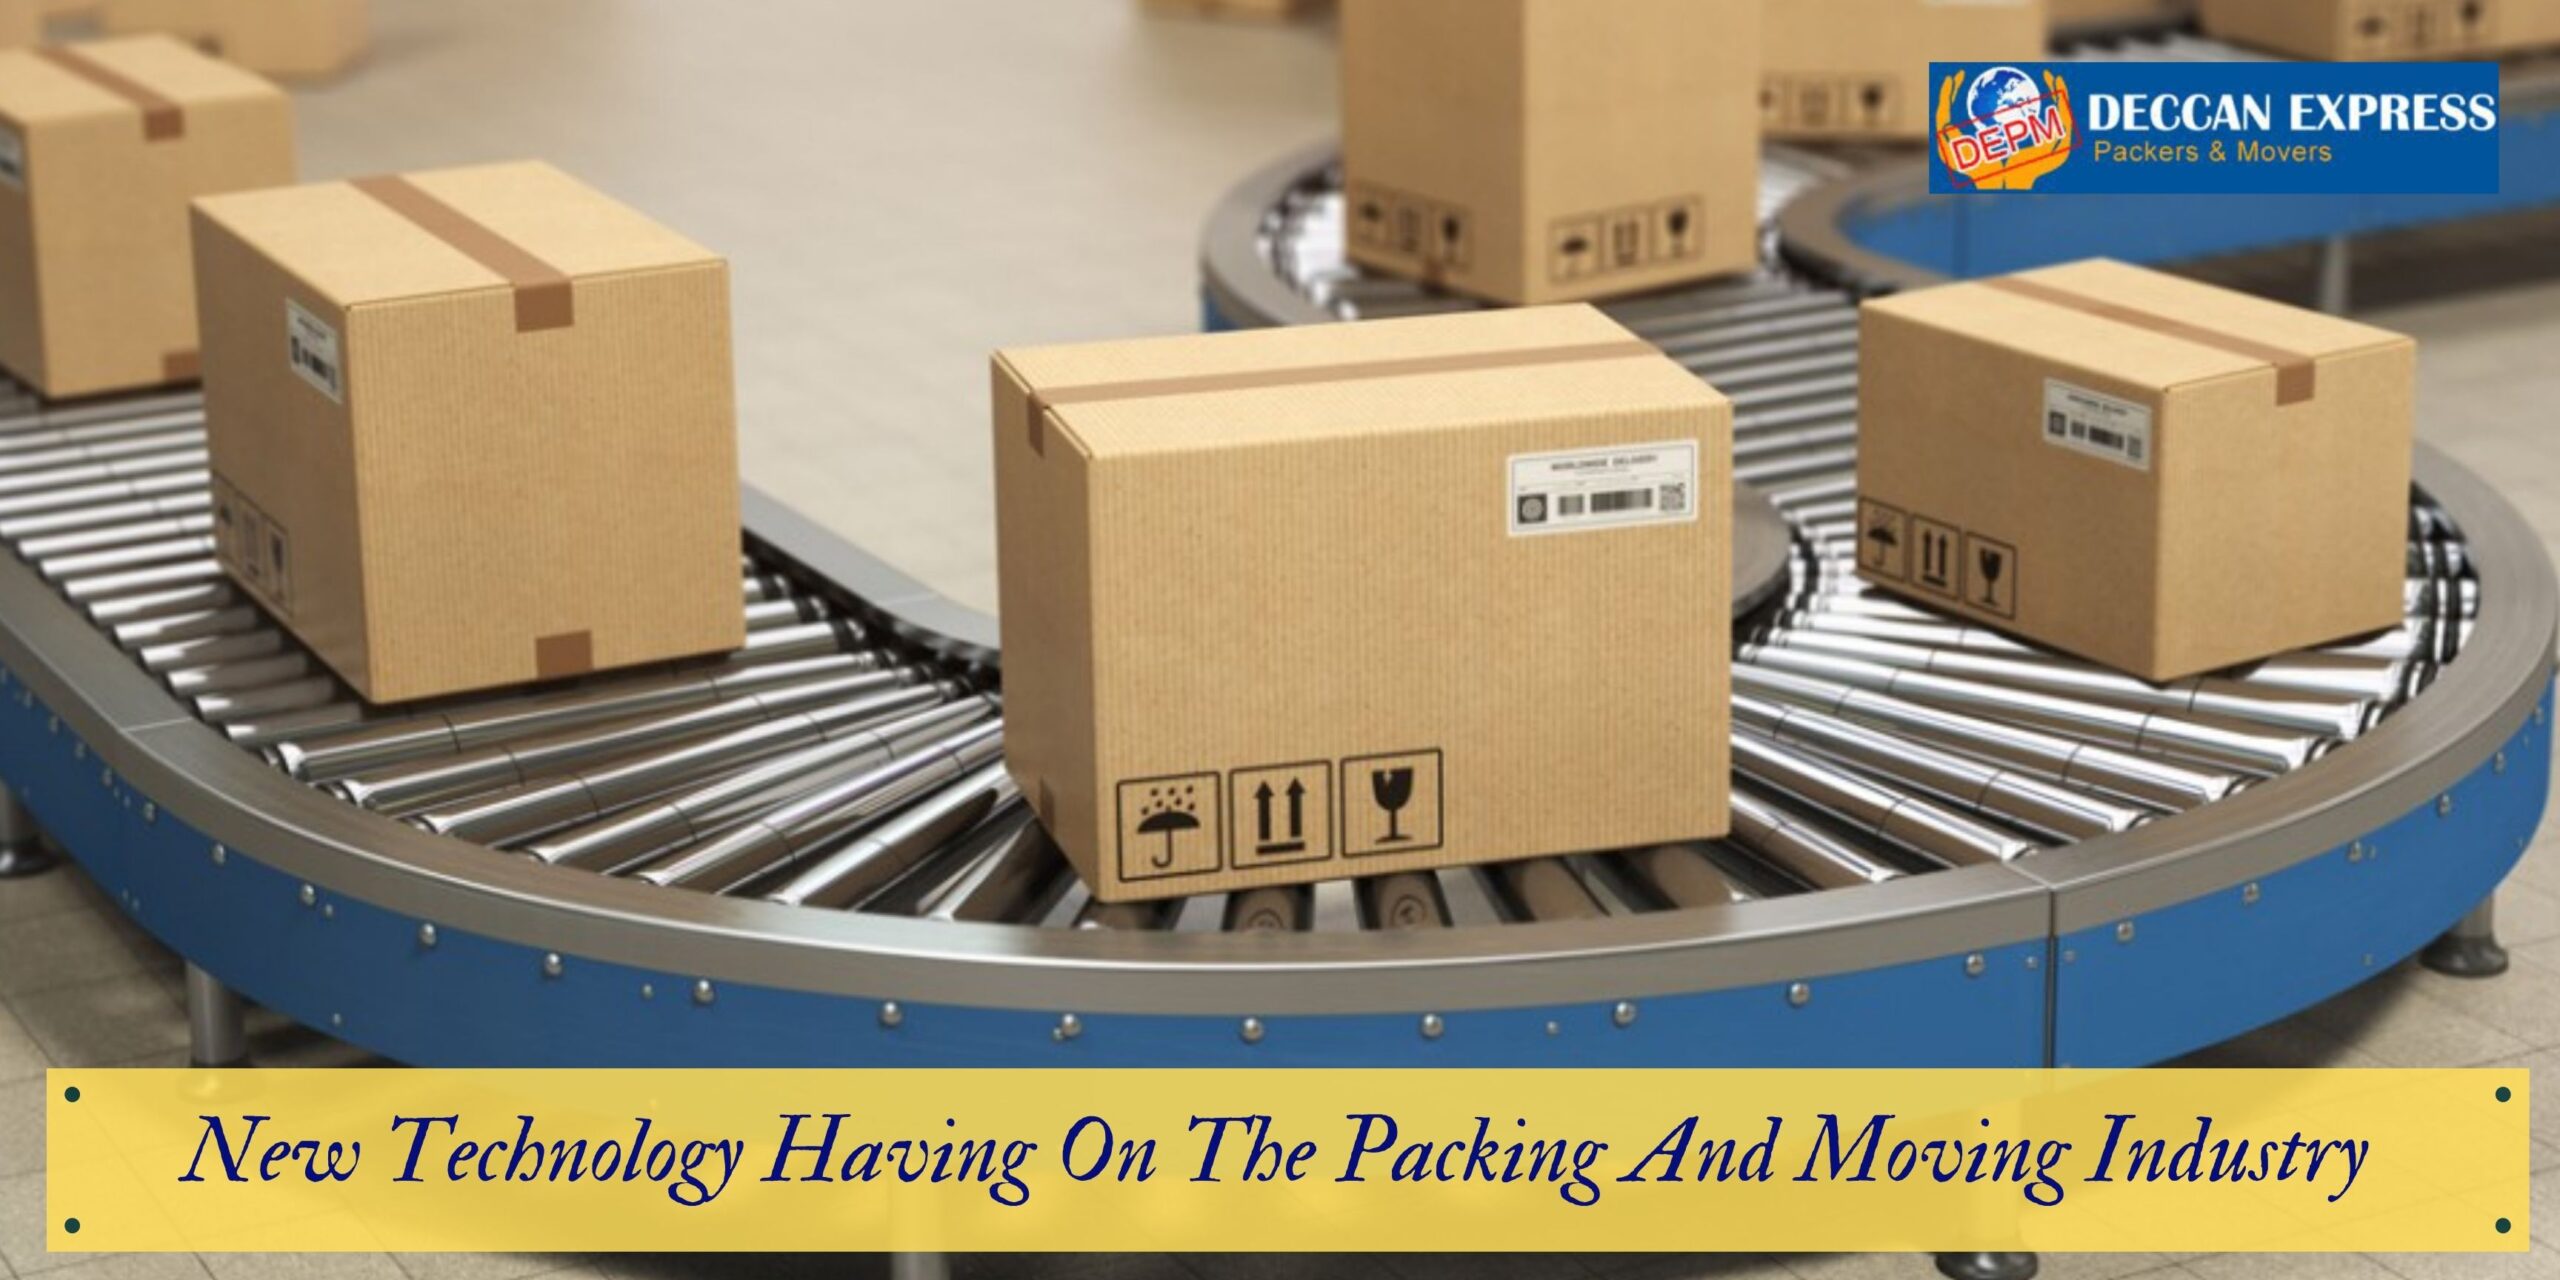 What Impact Is New Technology Having On The Packing And Moving Industry?